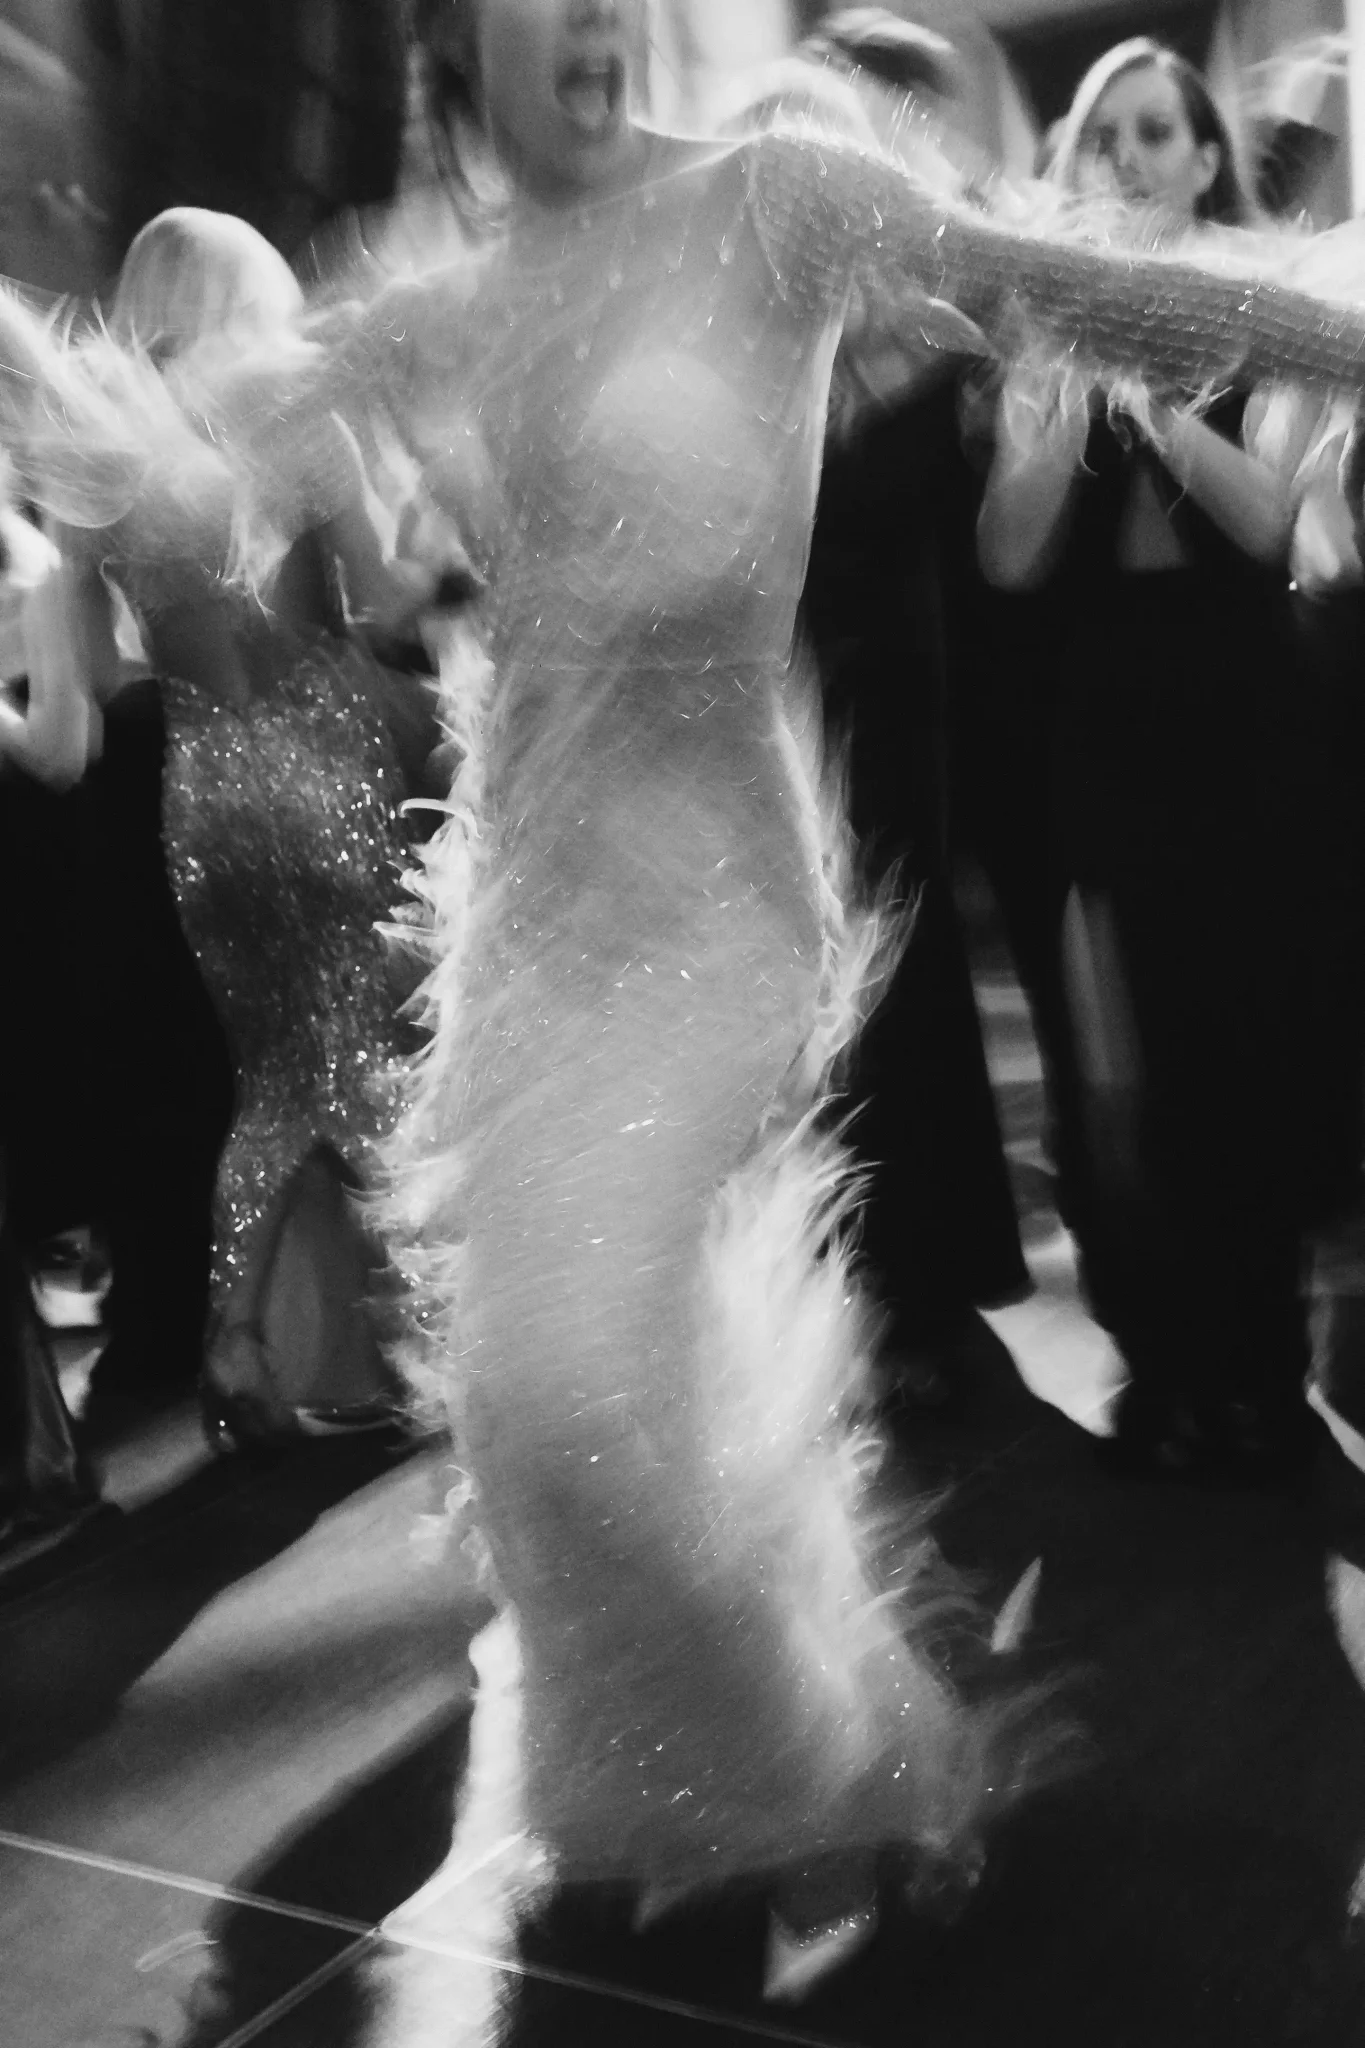 A woman in a white dress dancing at a wedding.